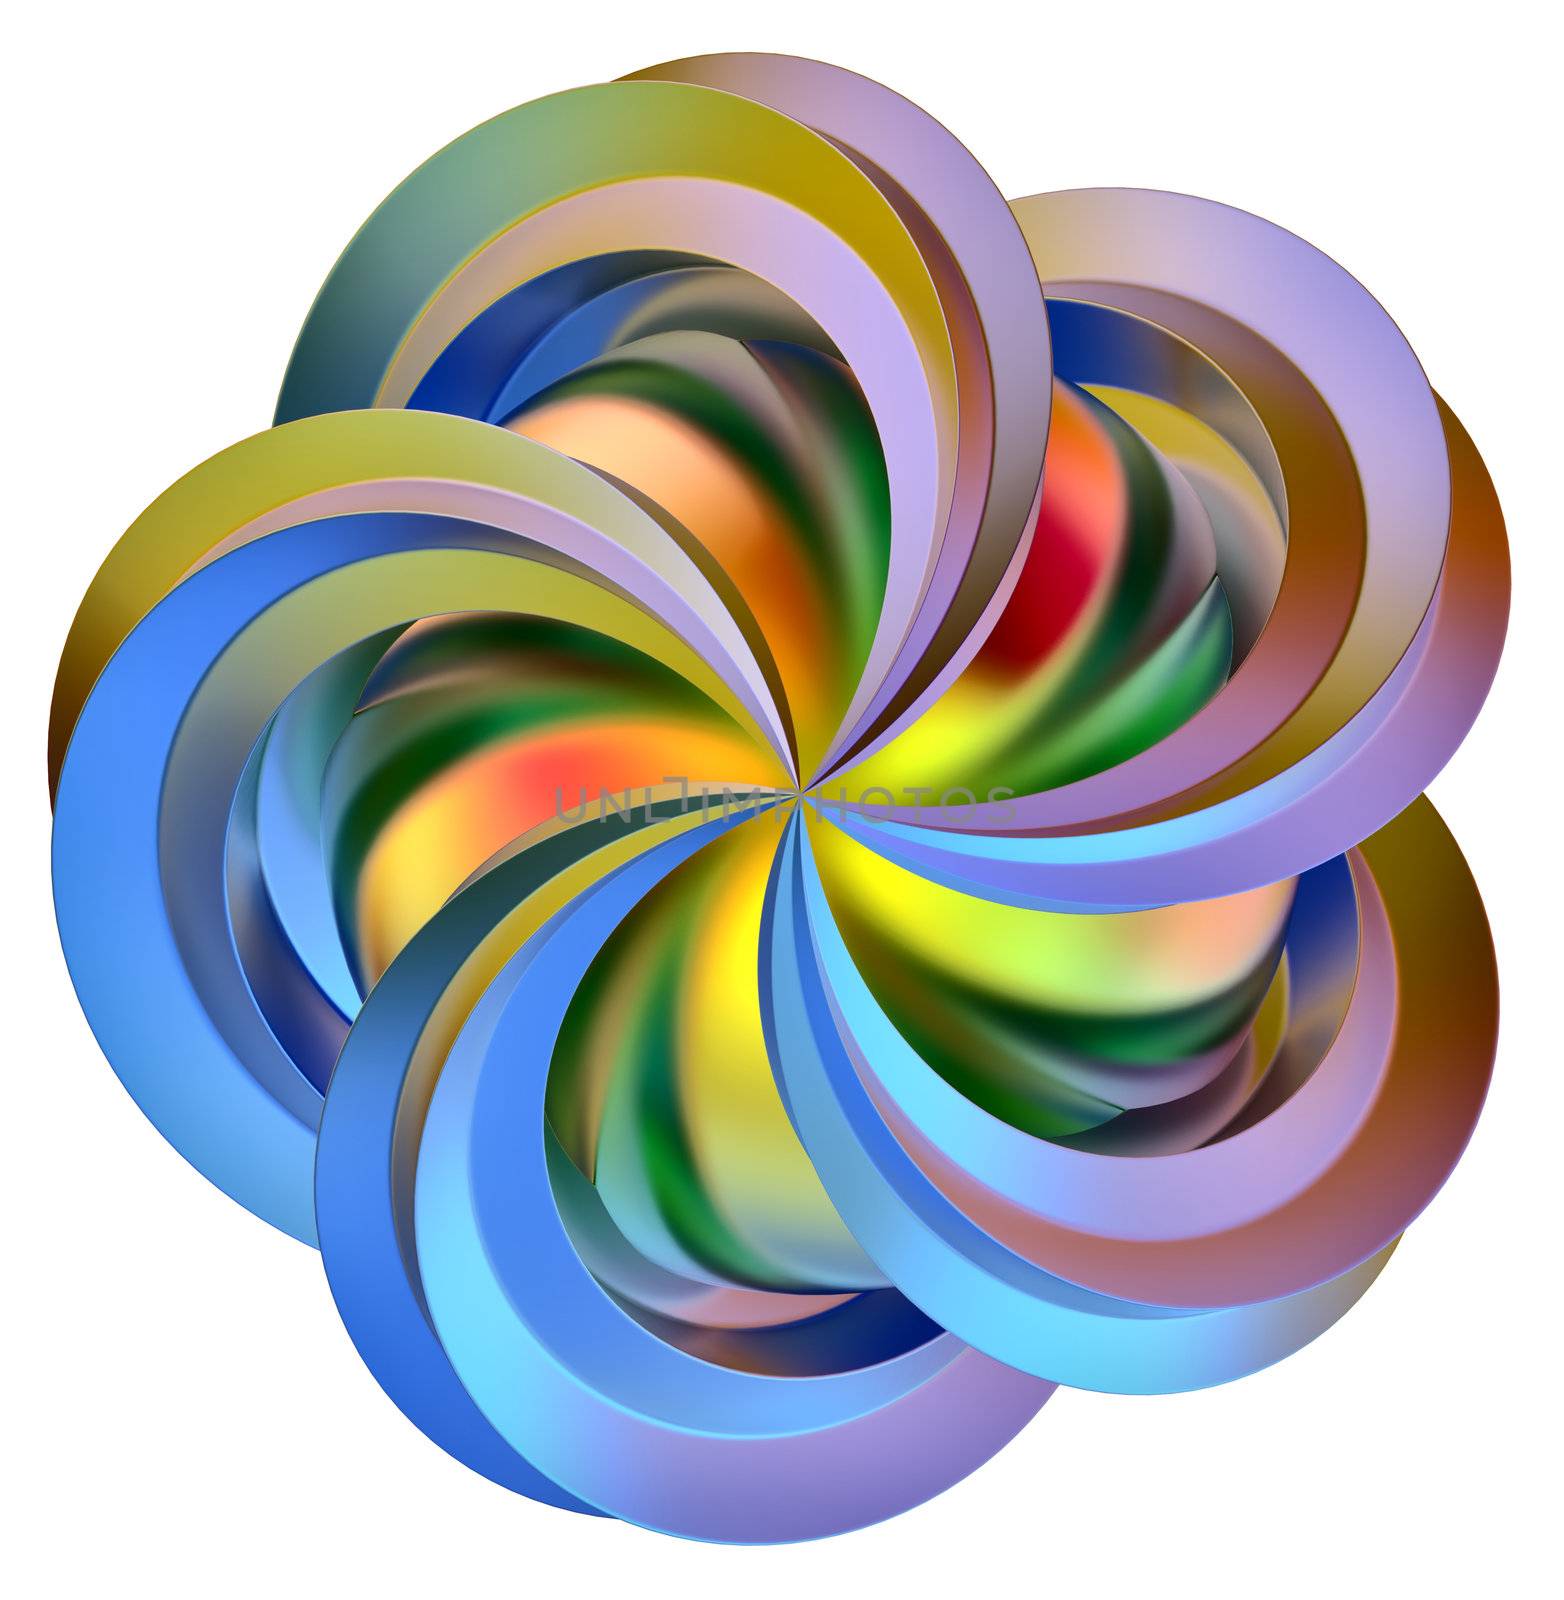 abstract 3d colored flower as a symbol of contemporary art